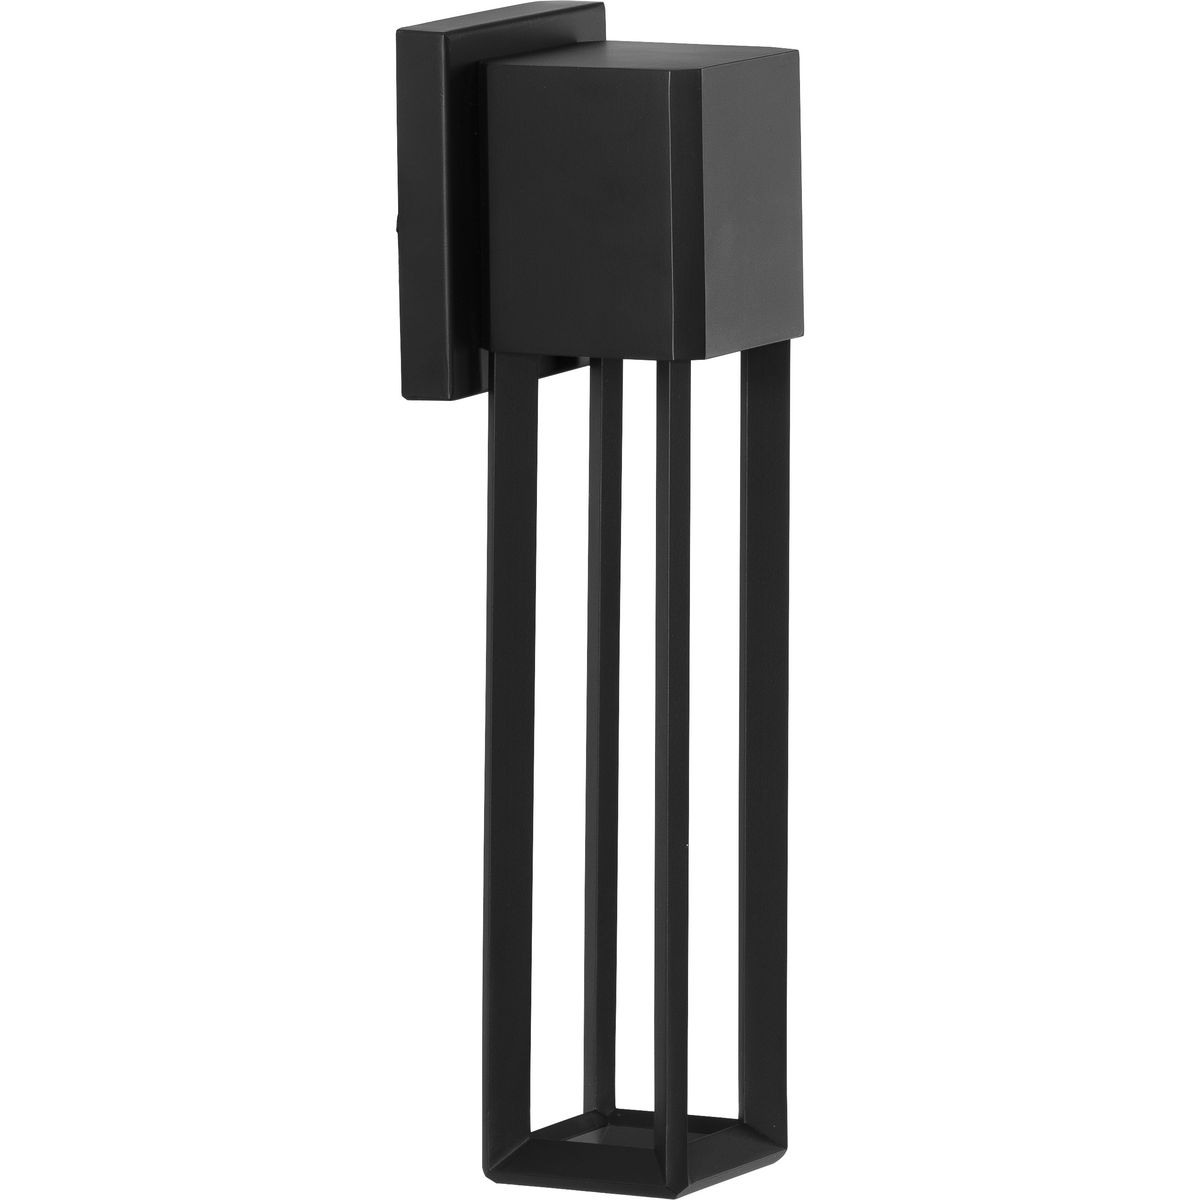 Z-1090 LED Collection Black One-Light Medium Wall Lantern - Wet Location Listed